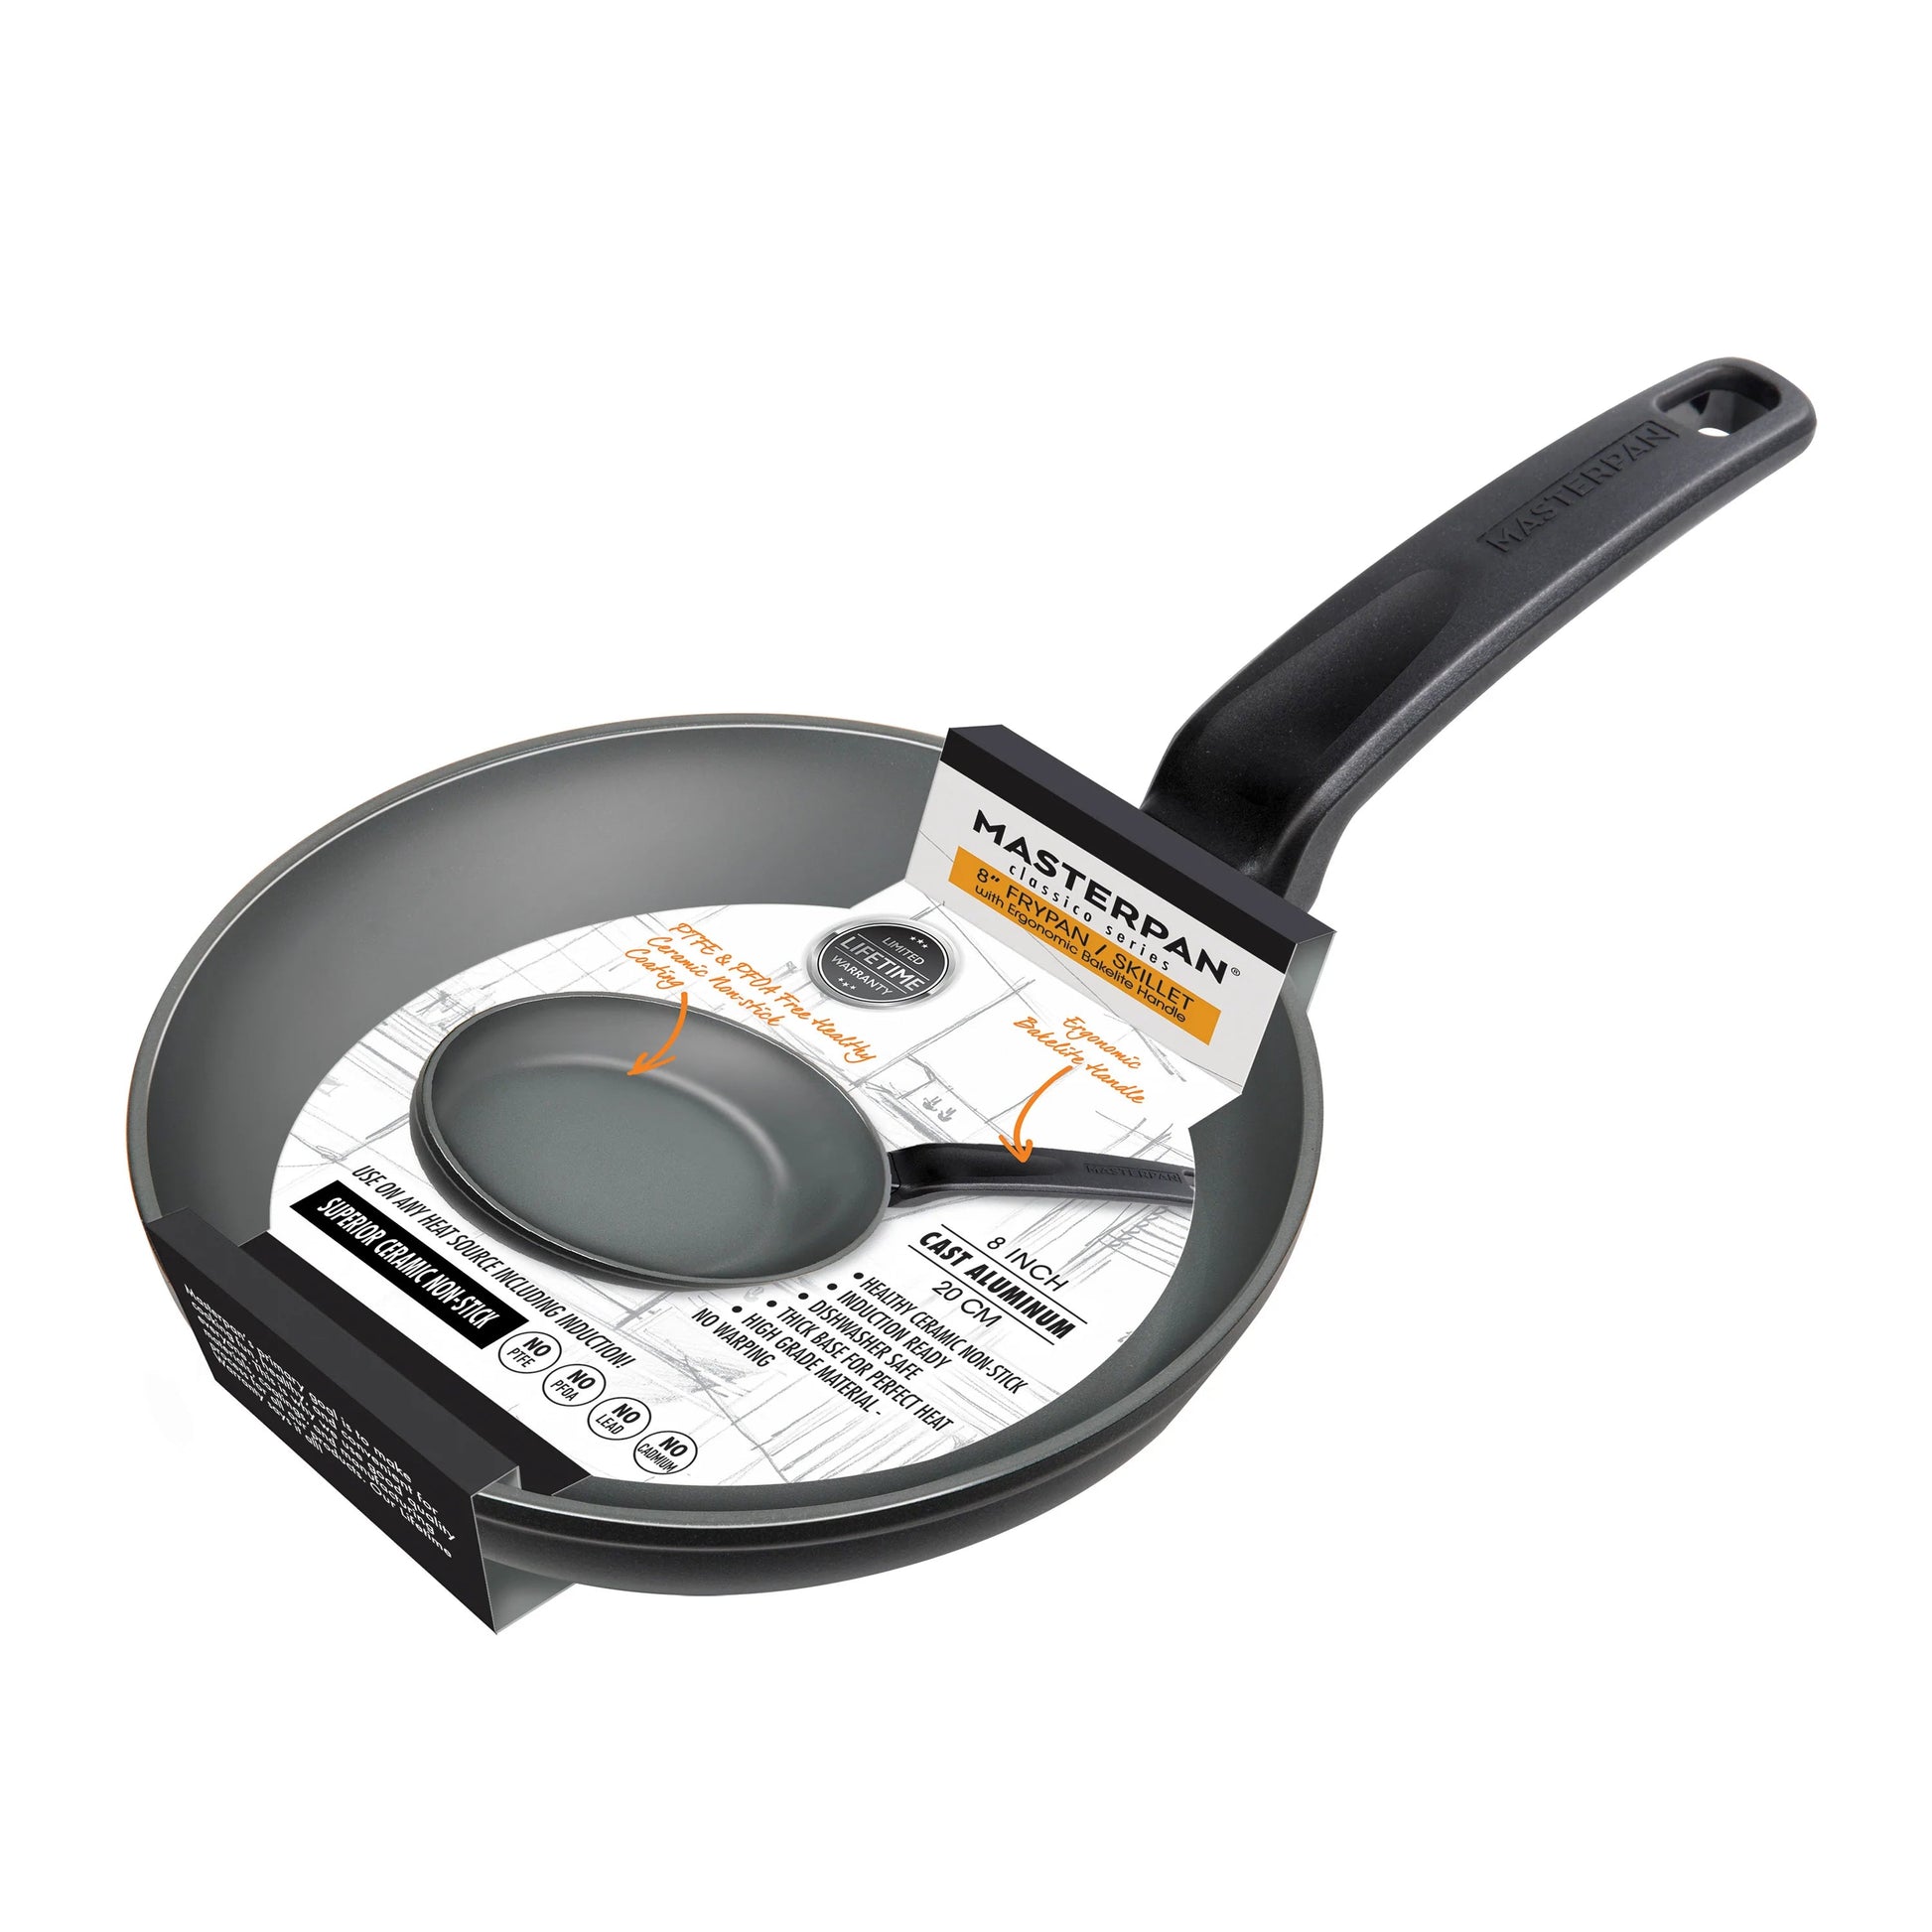 https://kitchenoasis.com/cdn/shop/files/MASTERPAN-Classico-Series-8-Fry-Pan-and-Skillet-Healthy-Ceramic-Non-stick-Aluminum-Cookware-With-Bakelite-Handle-6.webp?v=1685842025&width=1946